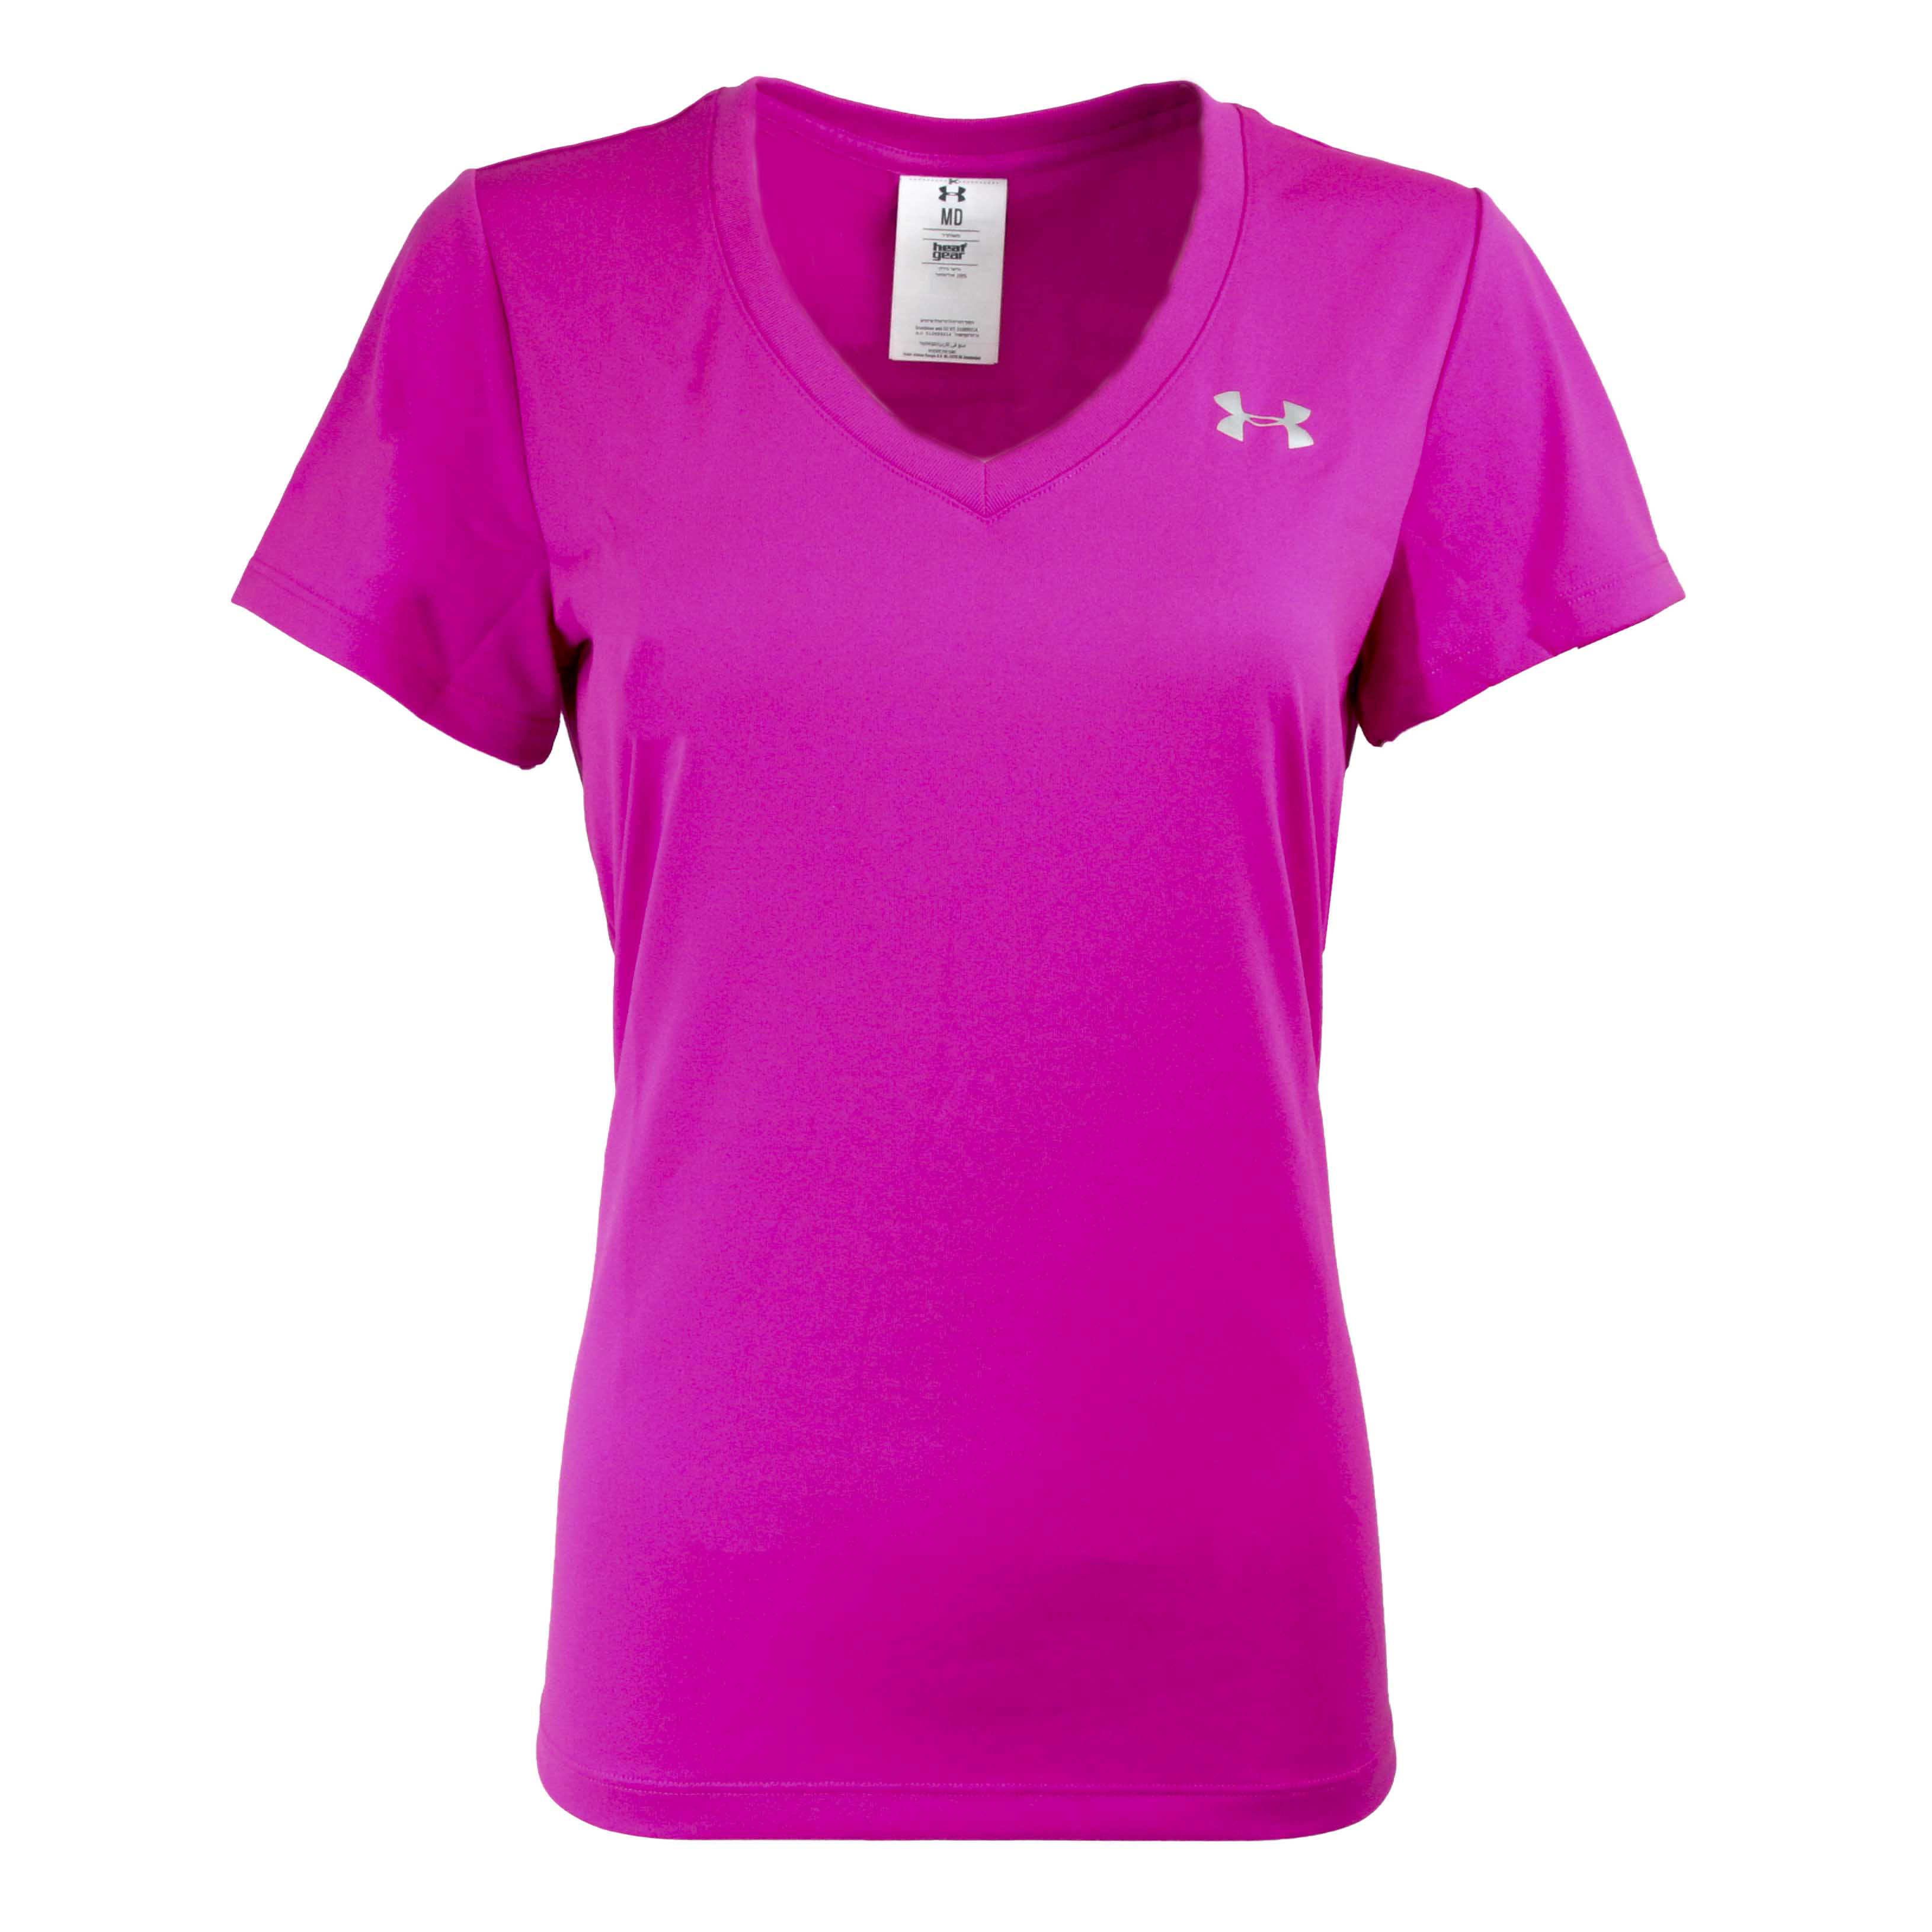 under armour loose fit womens shirts